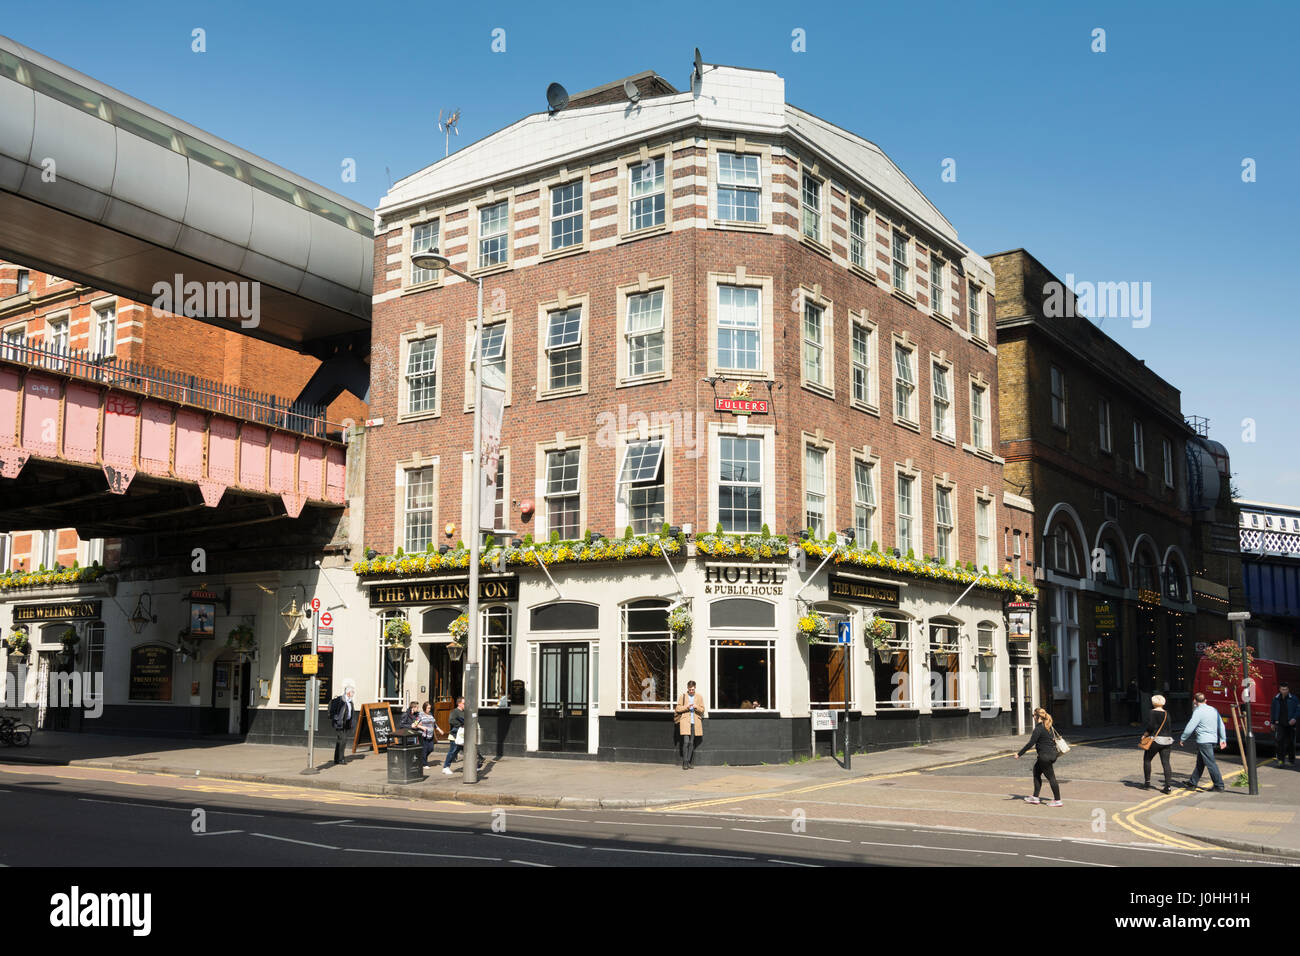 The Wellington Hotel High Resolution Stock Photography and Images - Alamy